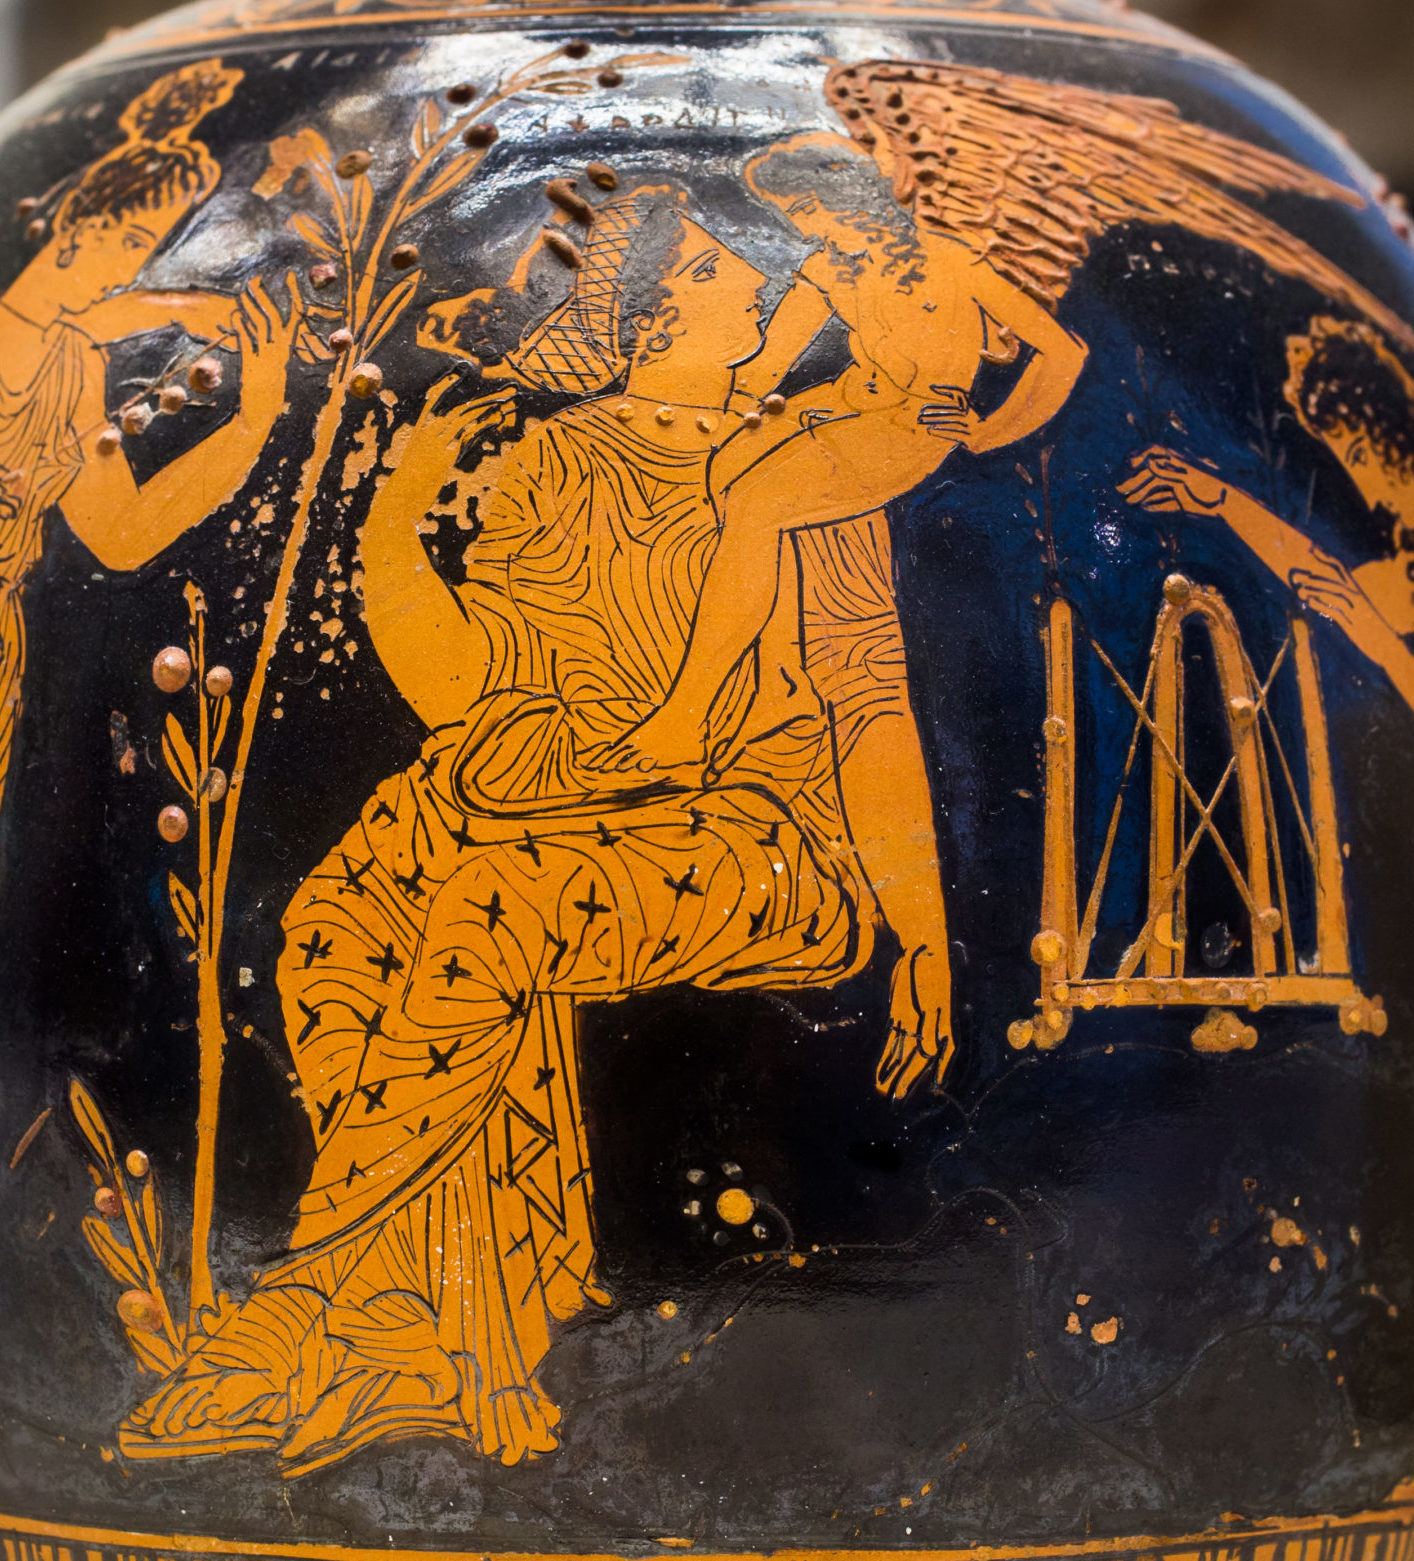 Aphrodite is seated with a small figure of winged Eros on her shoulder. She sits beside a tall myrtle branch, and two female figures flank her.